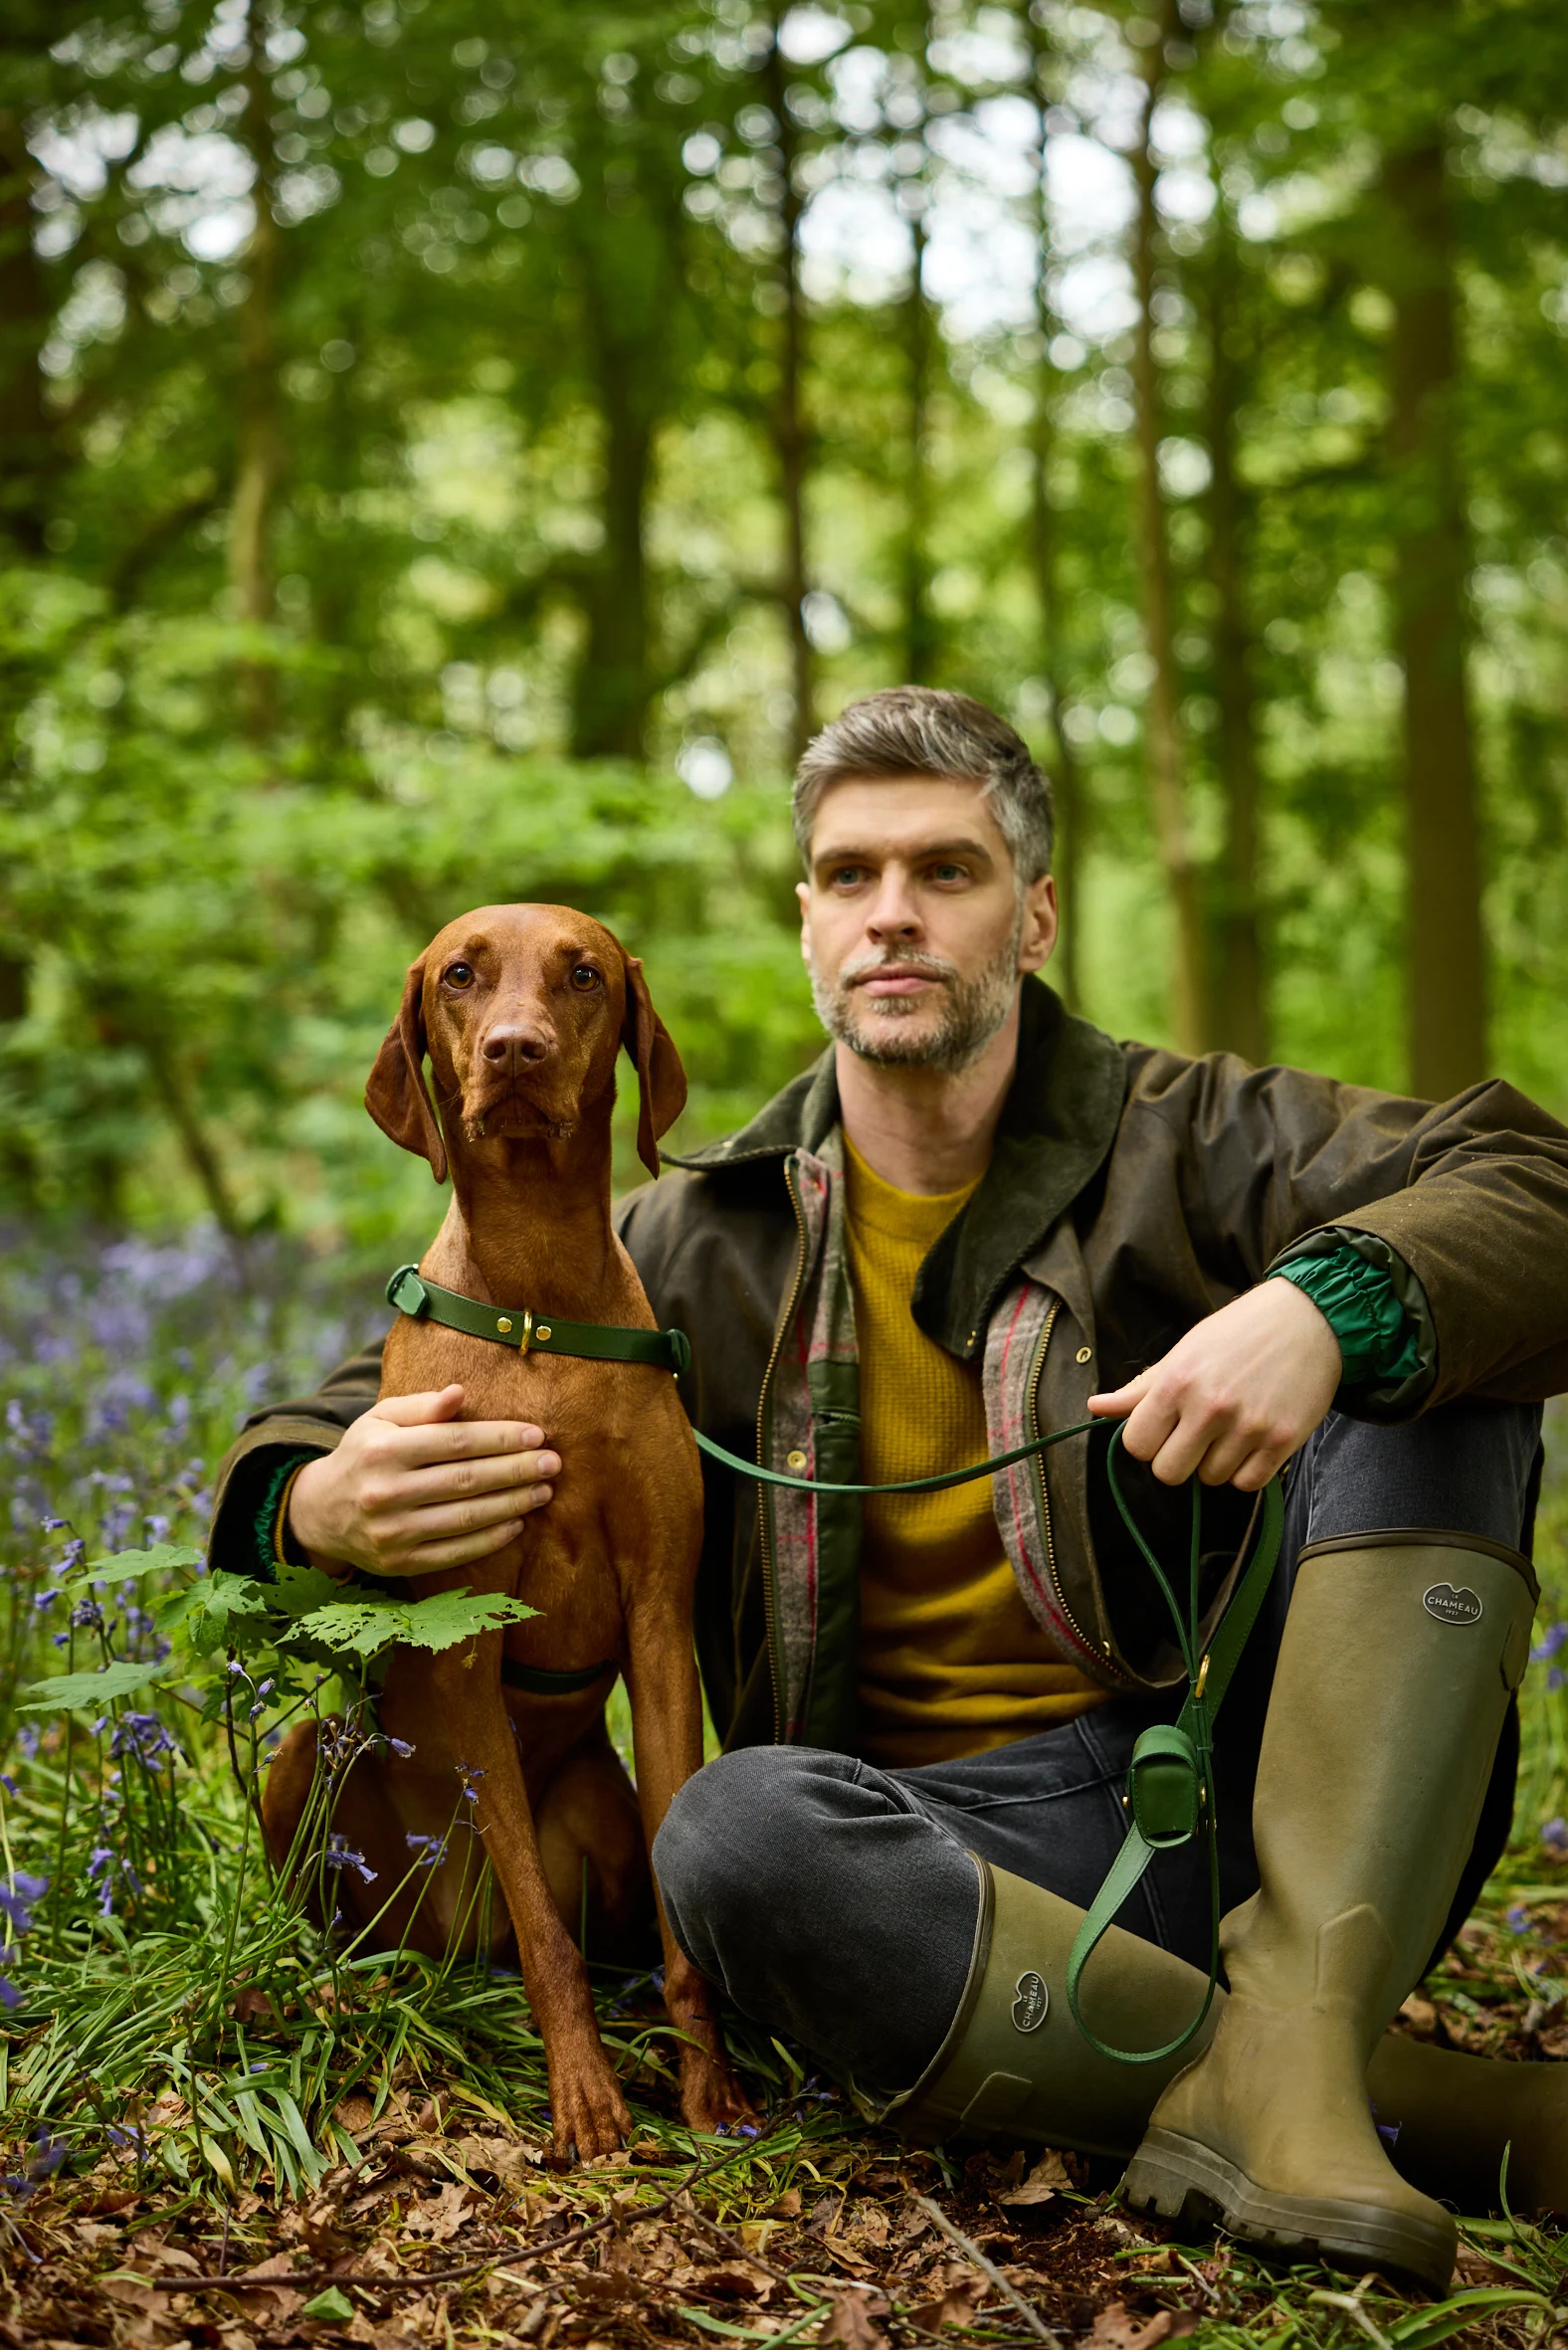 The Dog Range – In 2018, we adopted our first dog, Bertie from a shelter. Dissatisfied with the available offering for dog accessories, we got to work. 2 years later, we launched our first ever range; a fully integrated dog accessory set consisting of a leather leash, harness, collar and poo bag holder, that work seamlessly together.